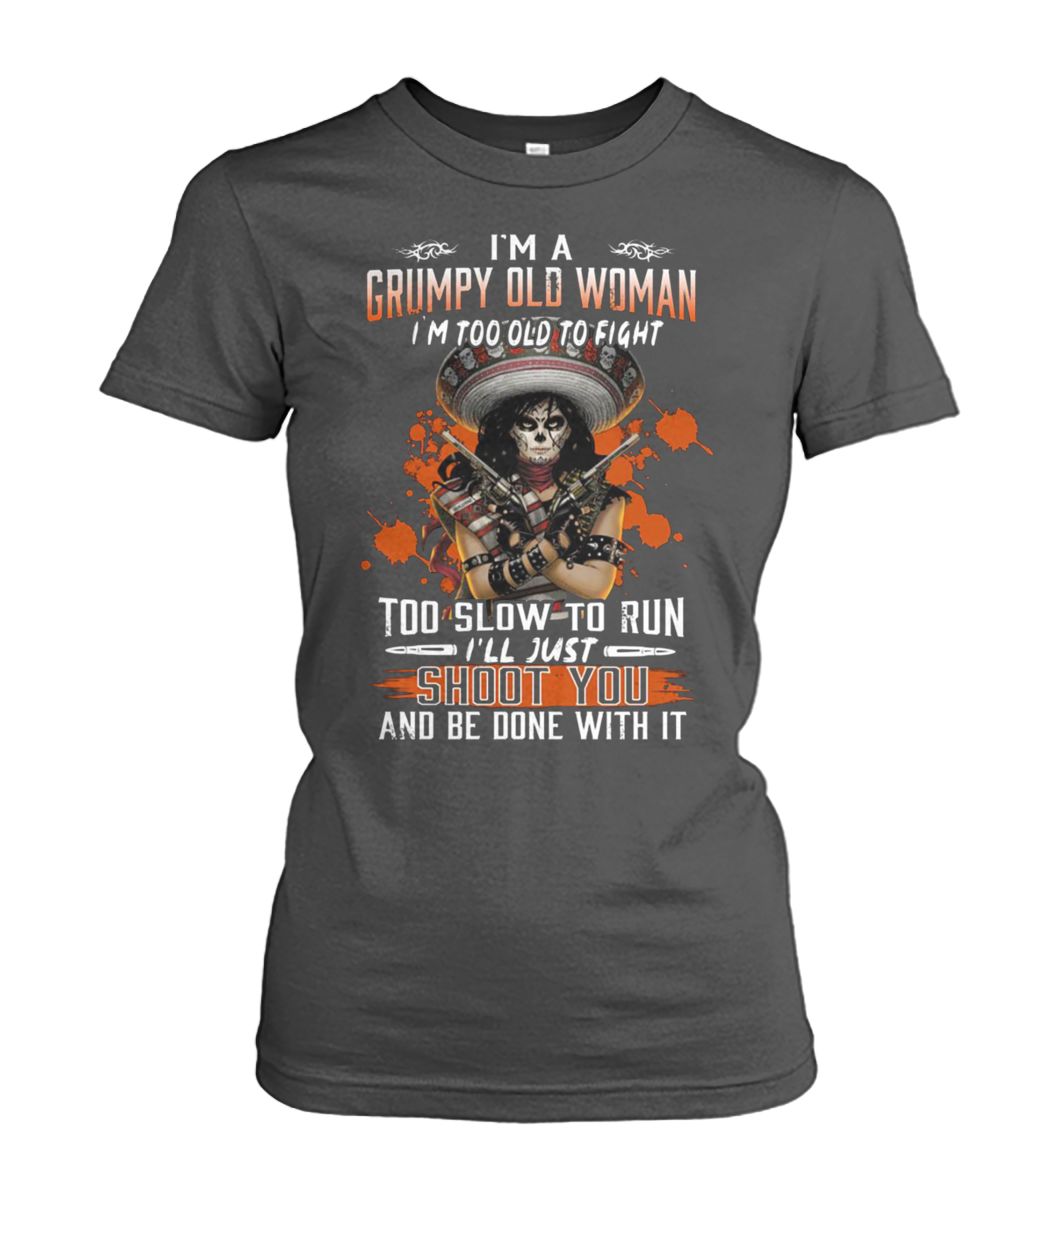 I'm a grumpy old woman I'm too old to fight too slow to run I'll just shoot you and be done with it women's crew tee